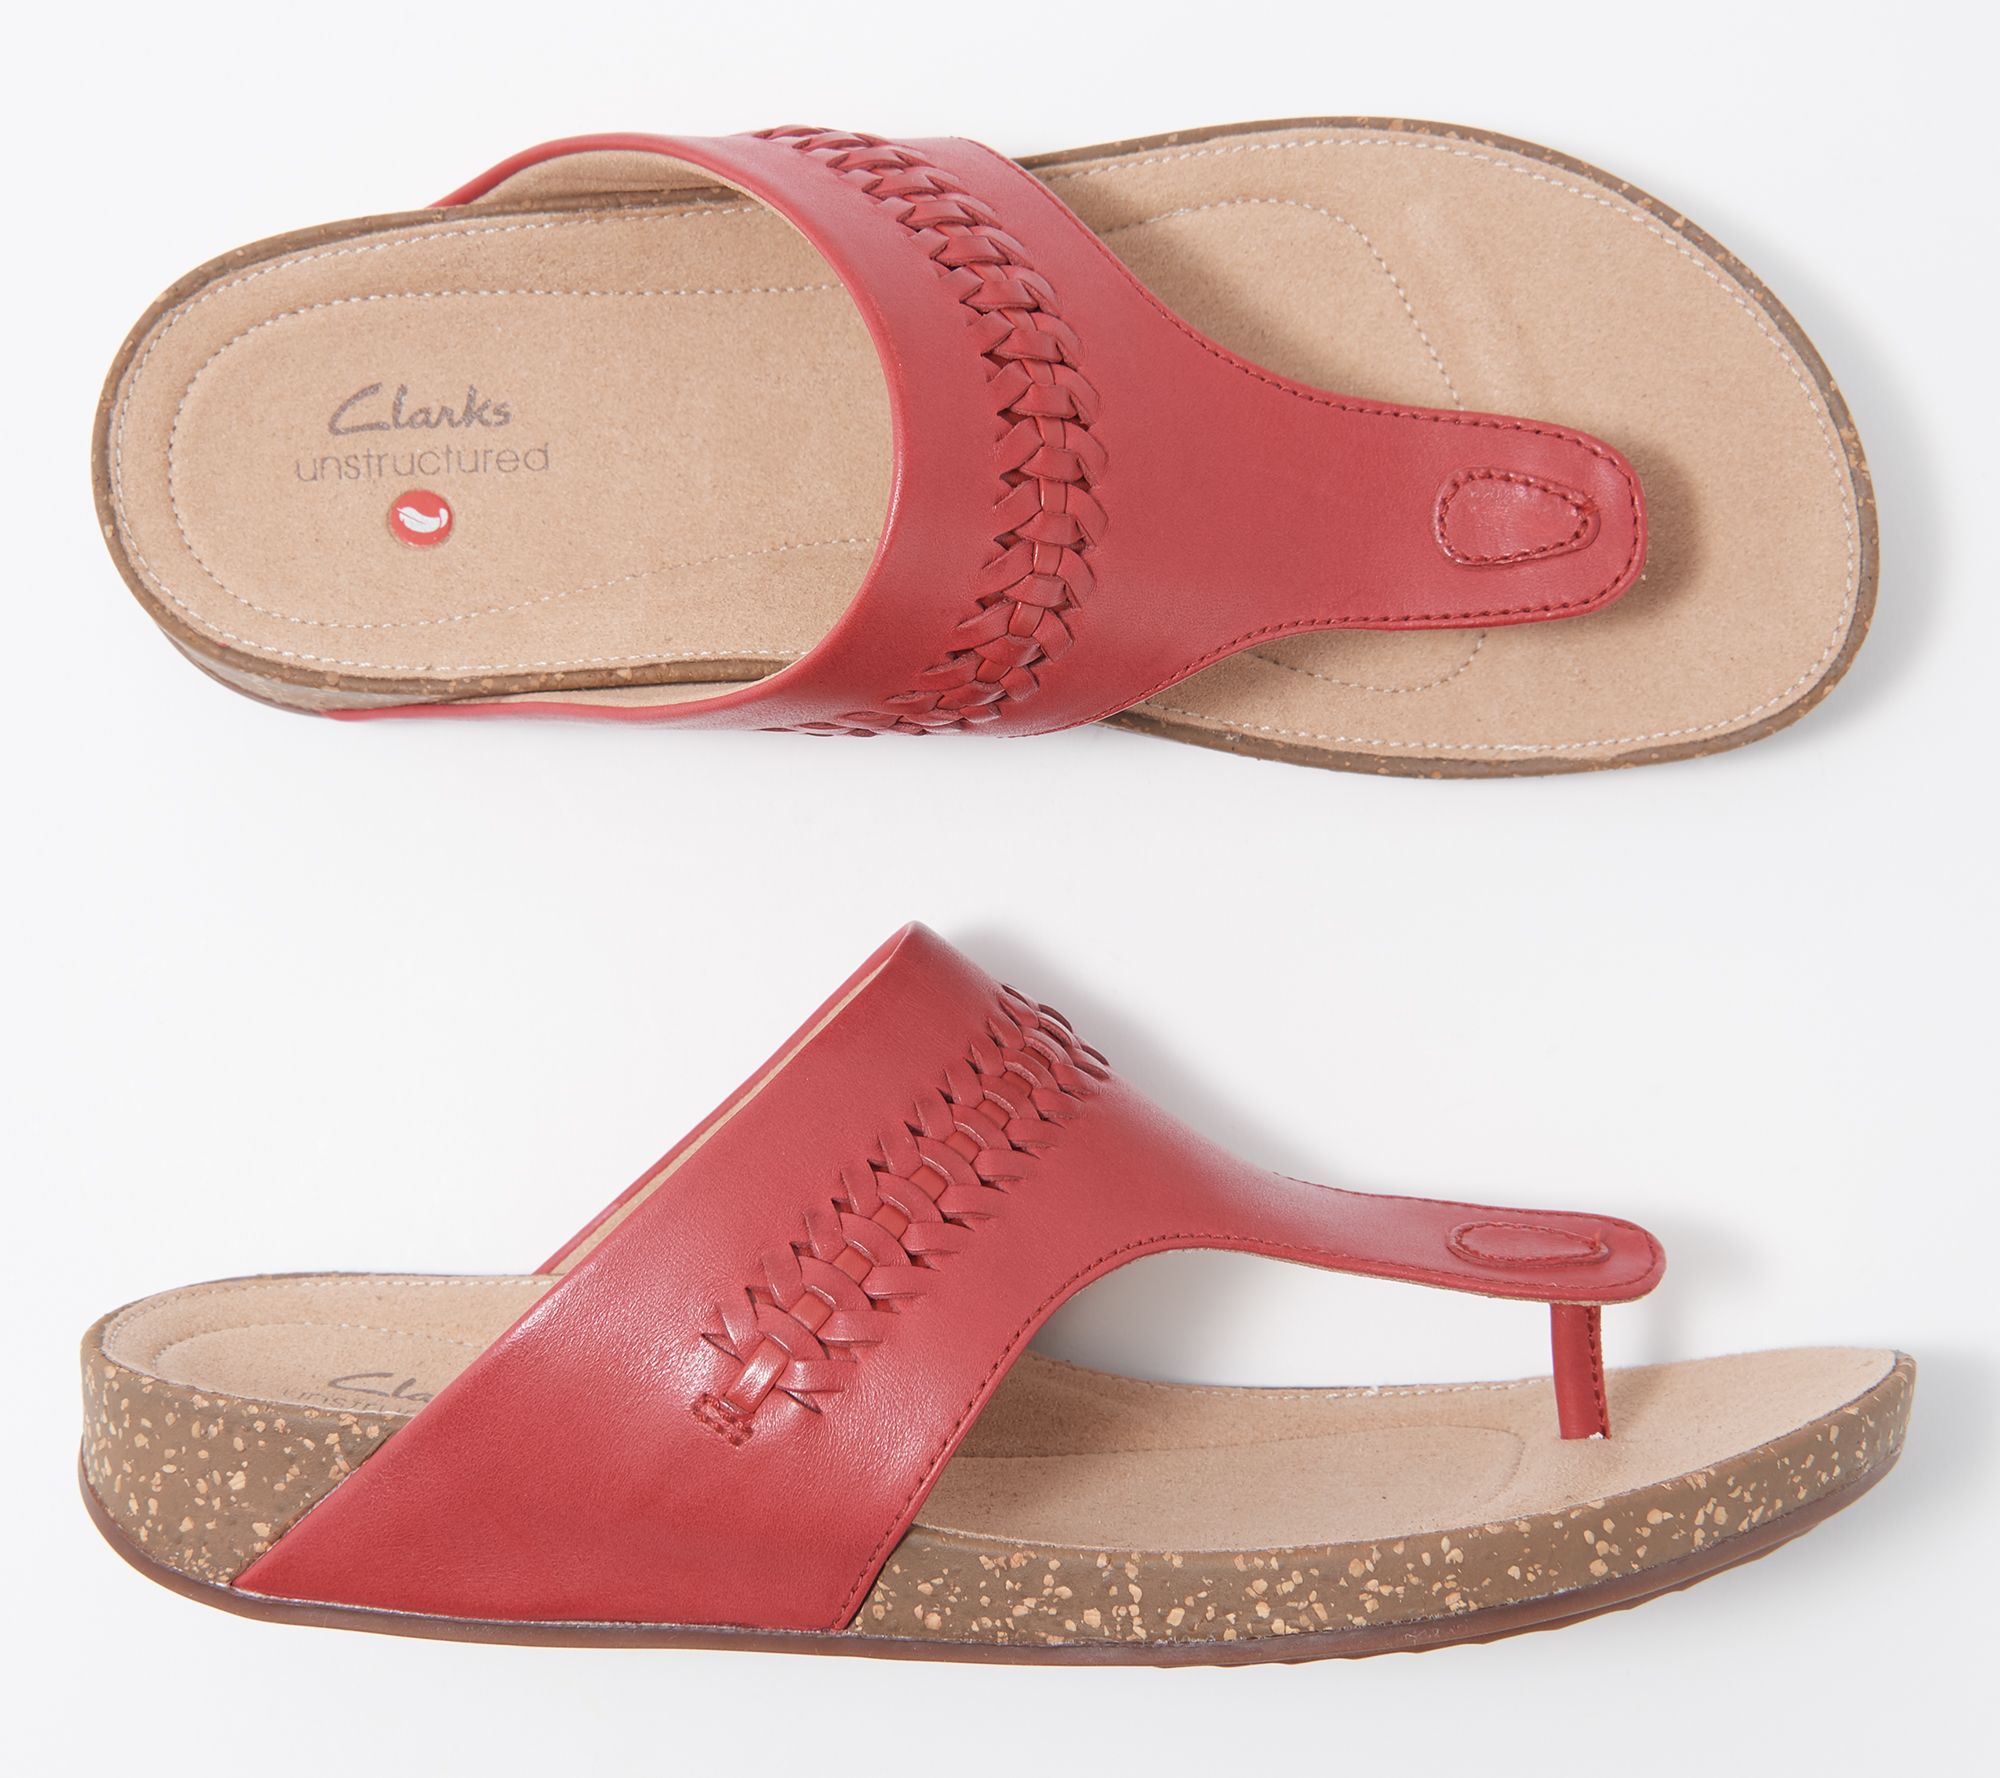 clark leather thong sandals